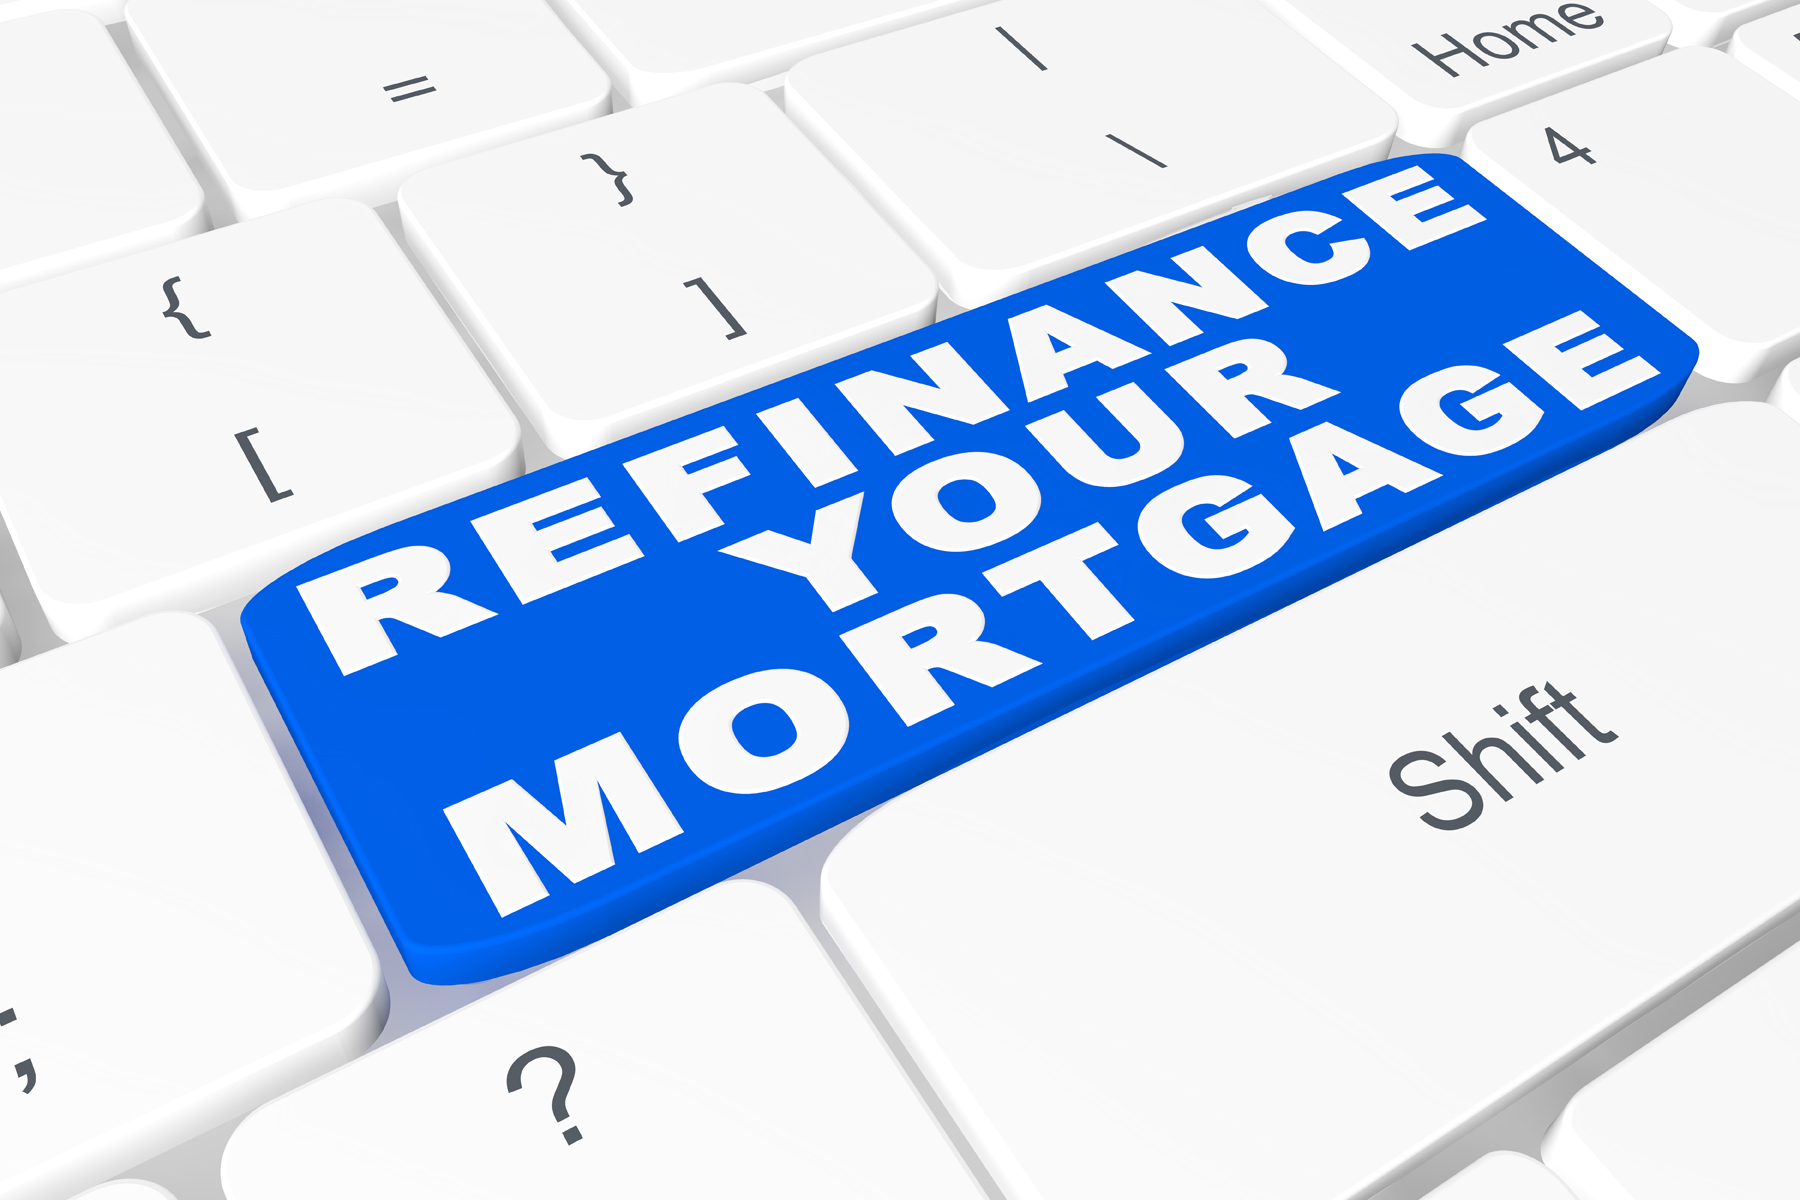 Refinancing is an option